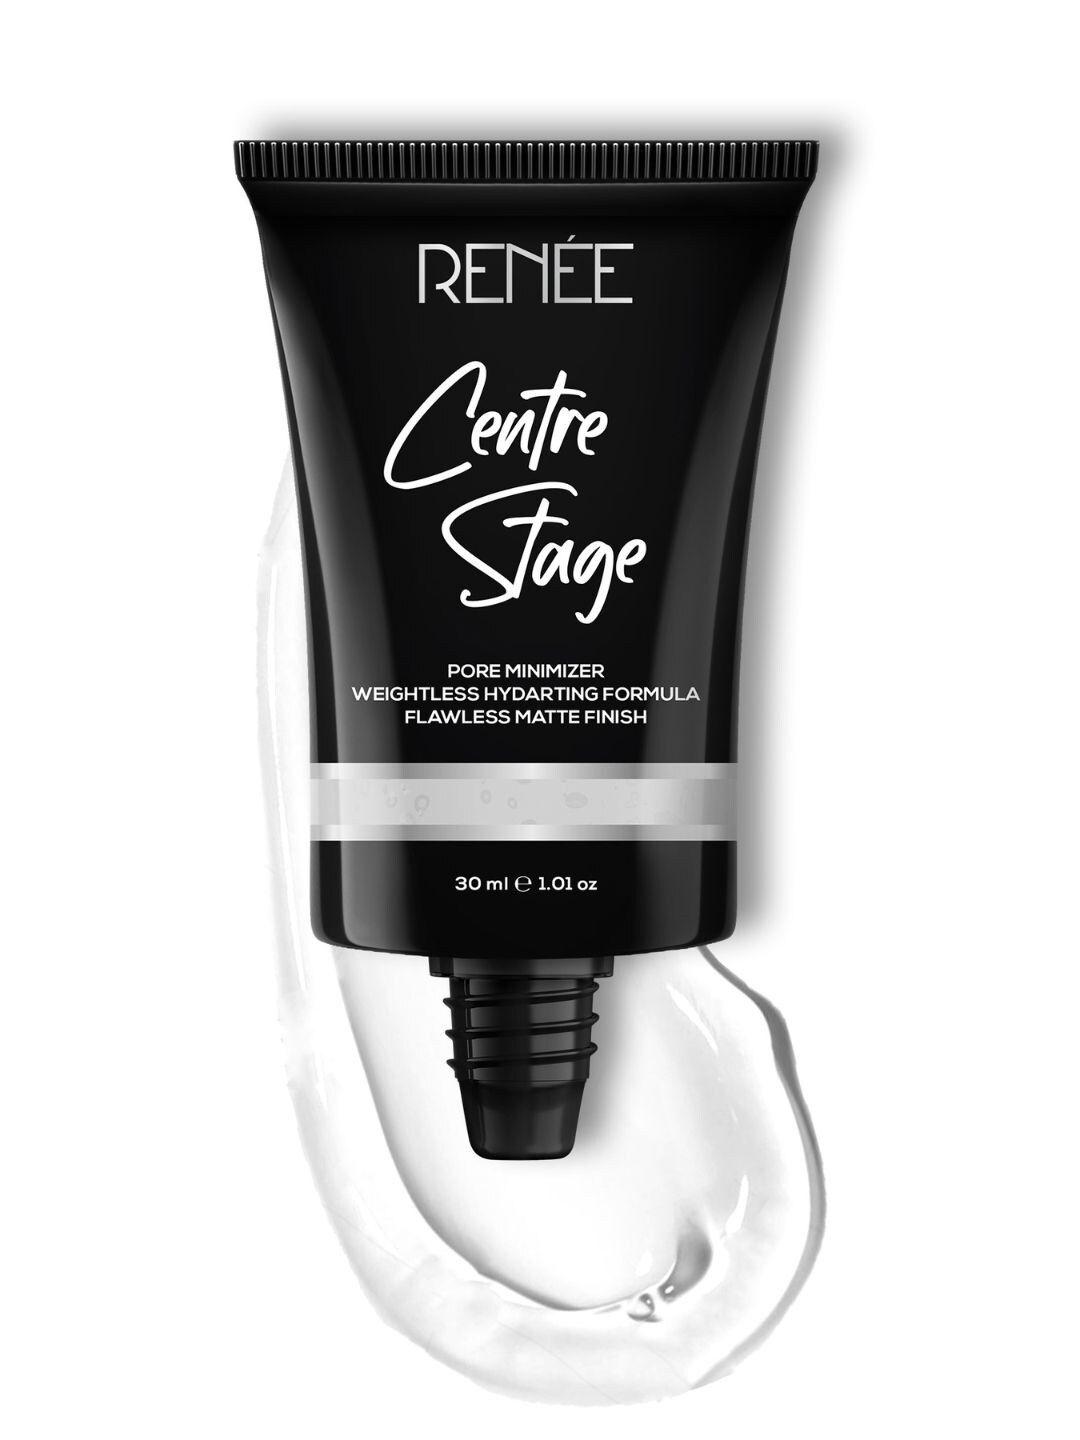 renee centre stage weightless hydrating flawless matte pore minimizer primer - 30ml